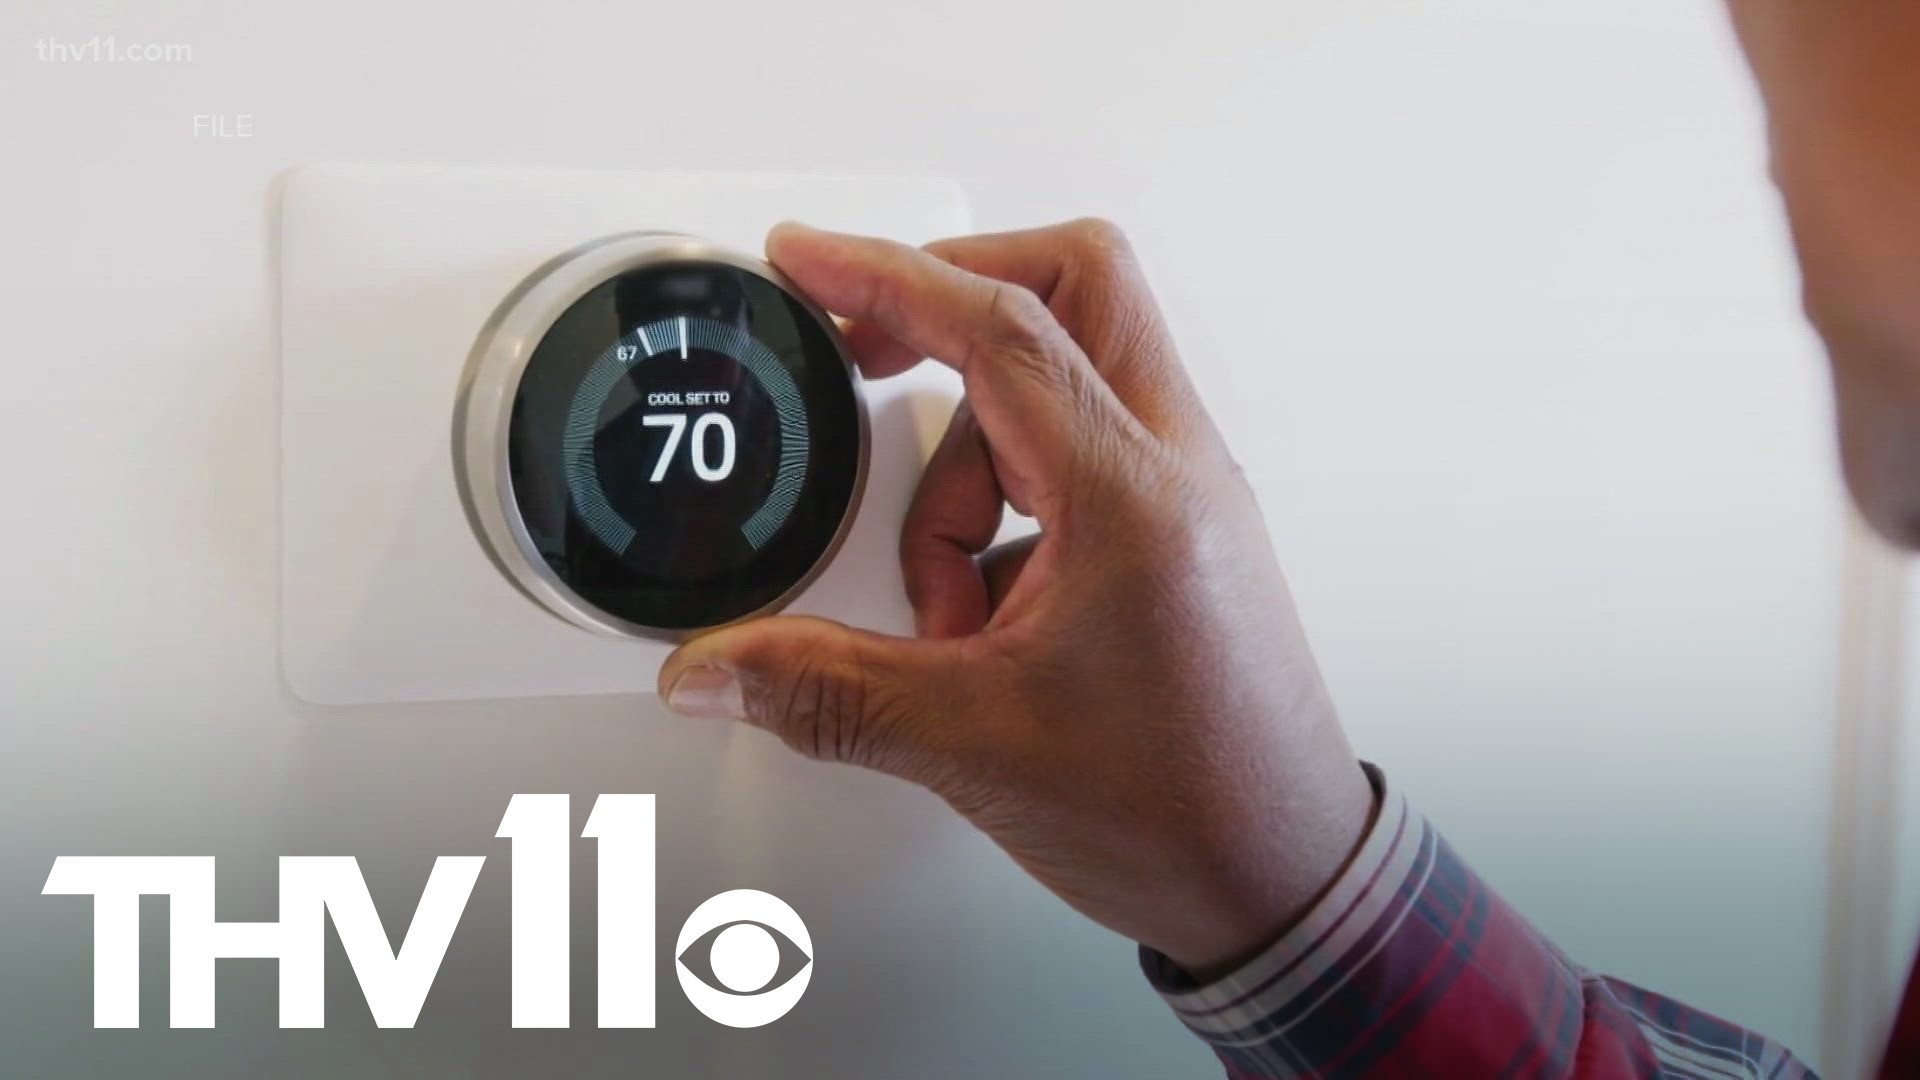 The heat is a the top of many Arkansans' minds. Naturally, we tend to turn down the A/C to cool down, but if you want to save money on your bill, you may think twice